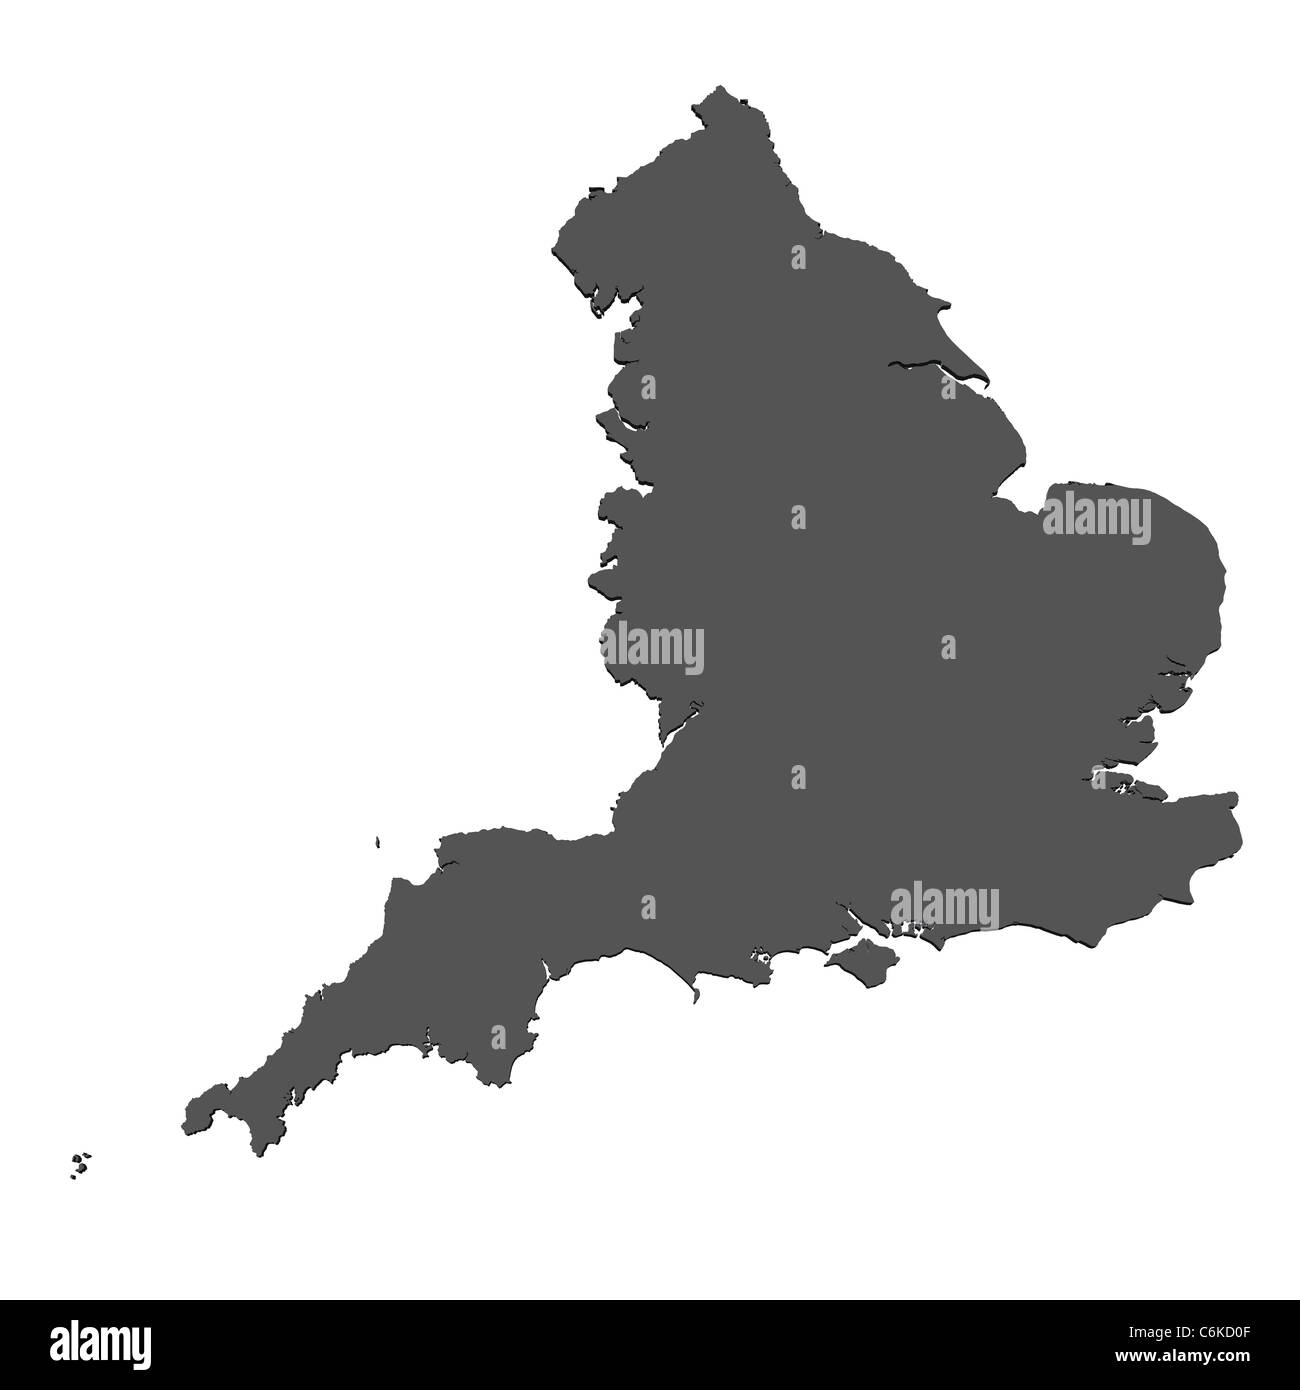 Isolated map of England Stock Photo